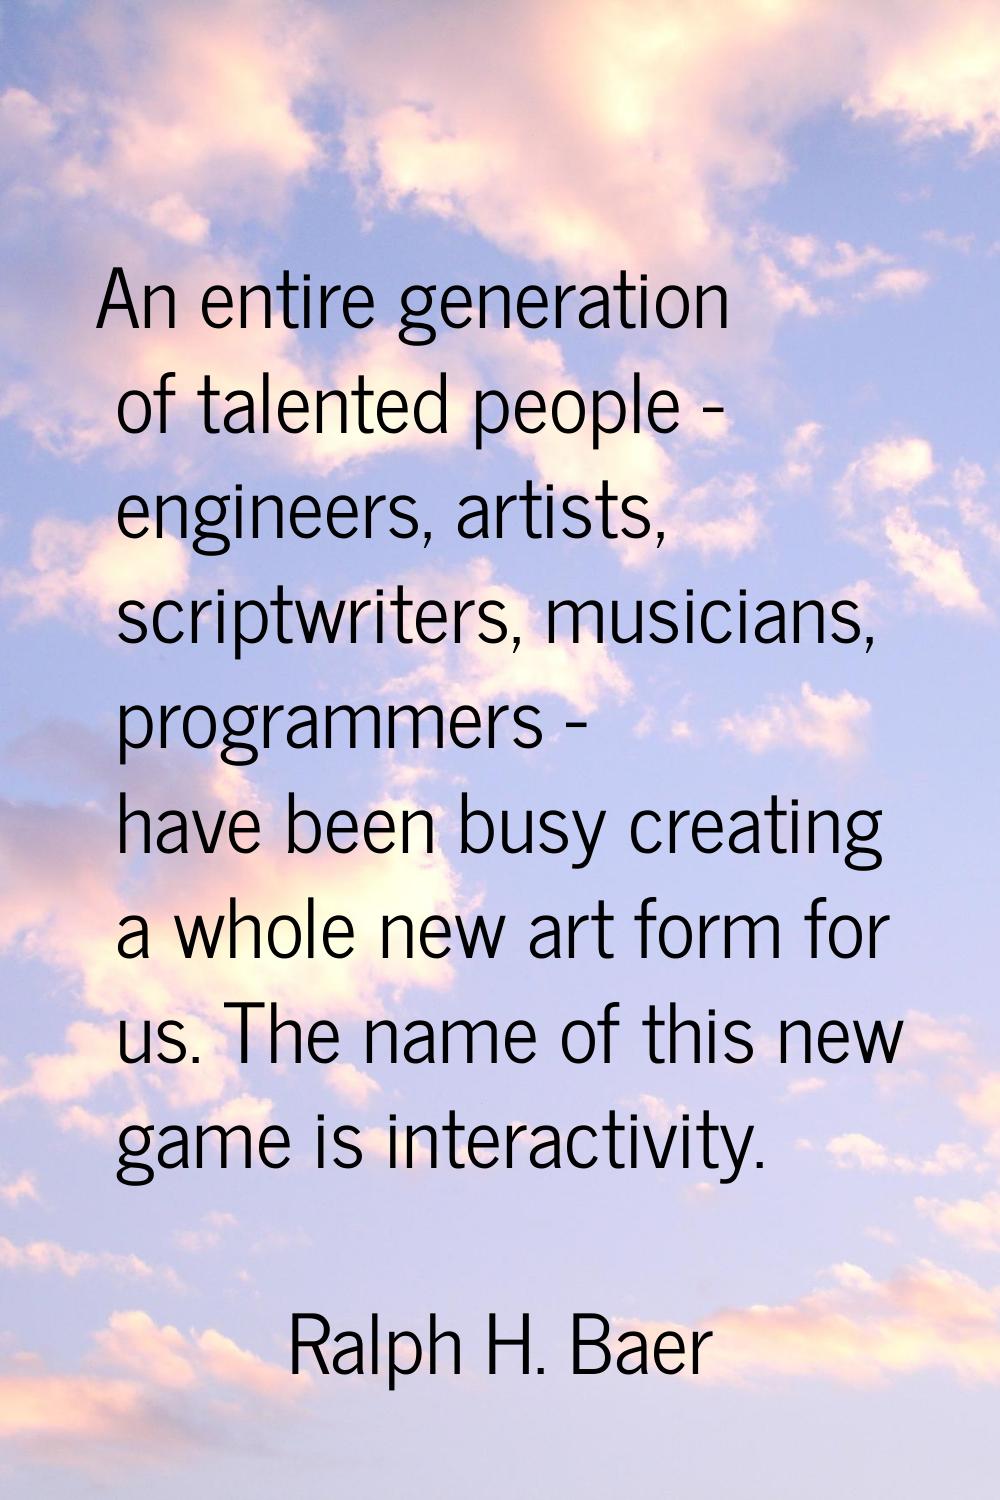 An entire generation of talented people - engineers, artists, scriptwriters, musicians, programmers